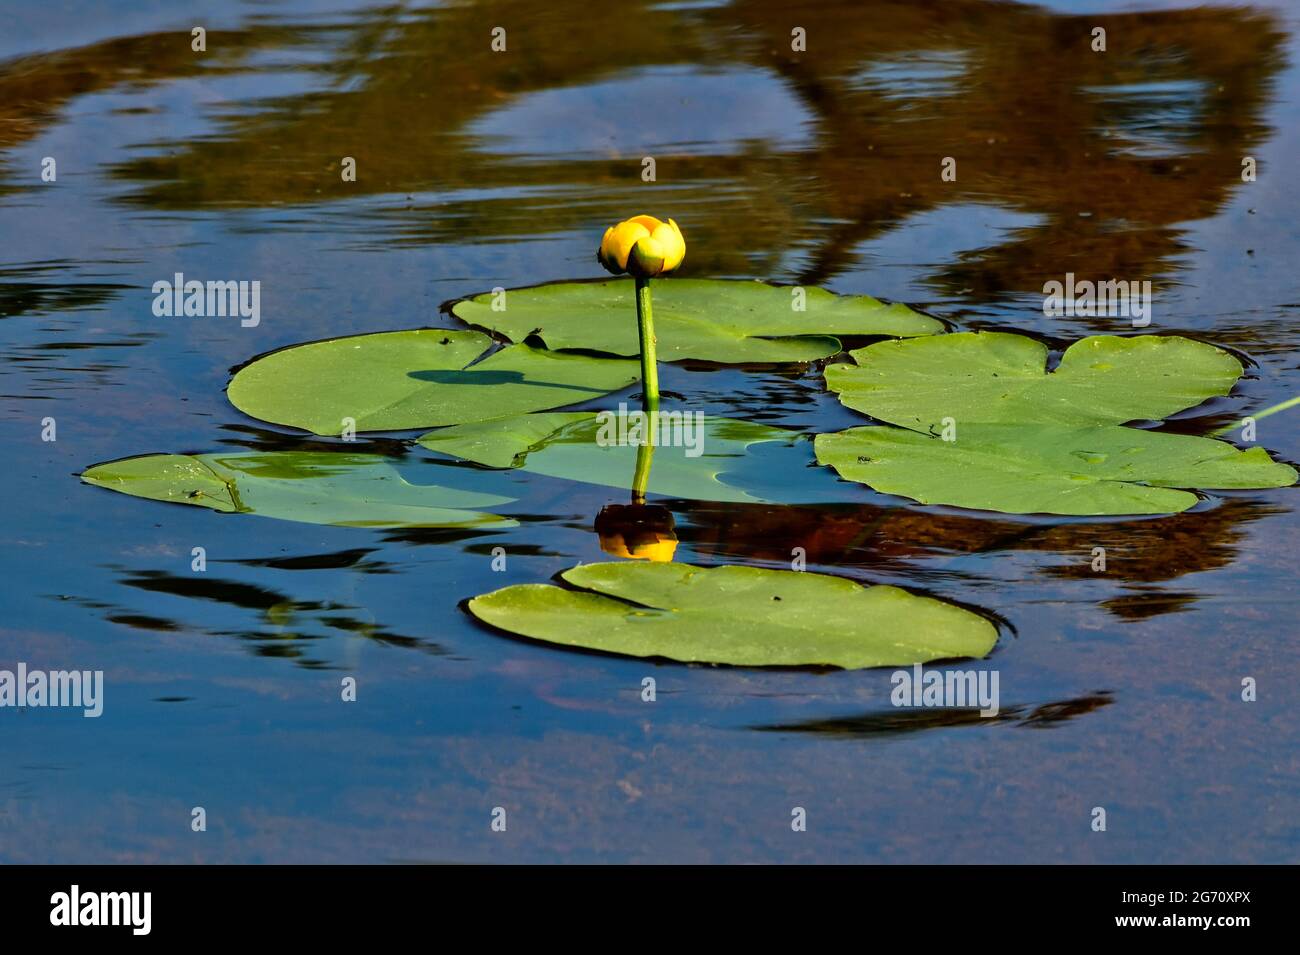 Lily pads with yellow blossoms "Nuphar lutea", growing in a shallow water pond Stock Photo